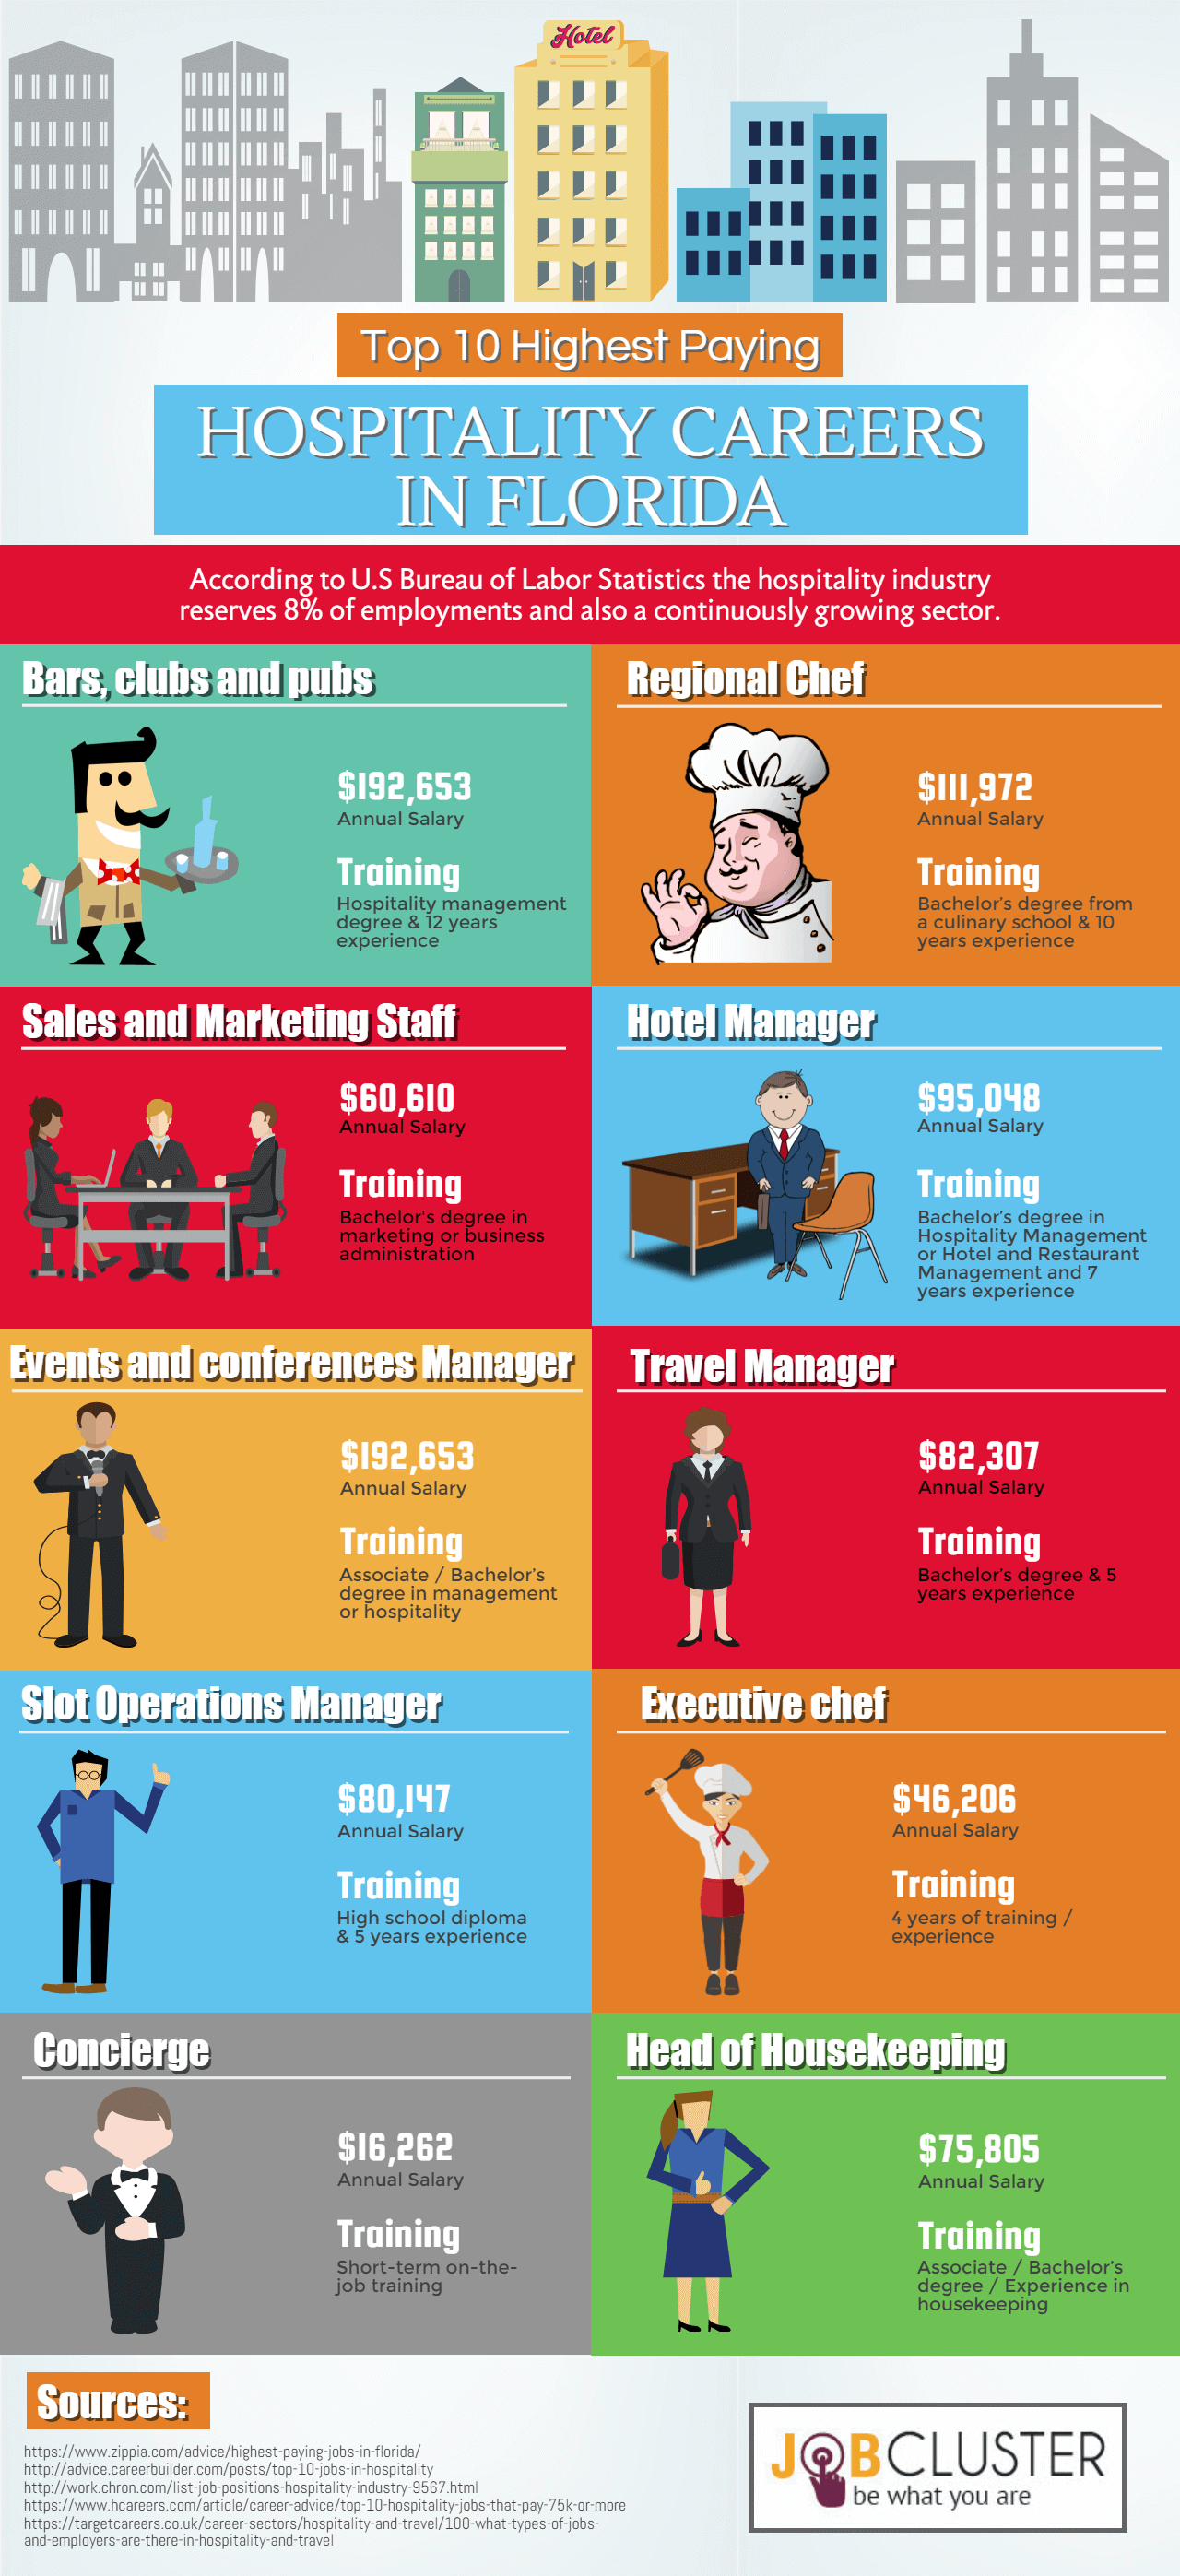 Top 10 Highest Paying Hospitality Jobs in Florida- Infographic